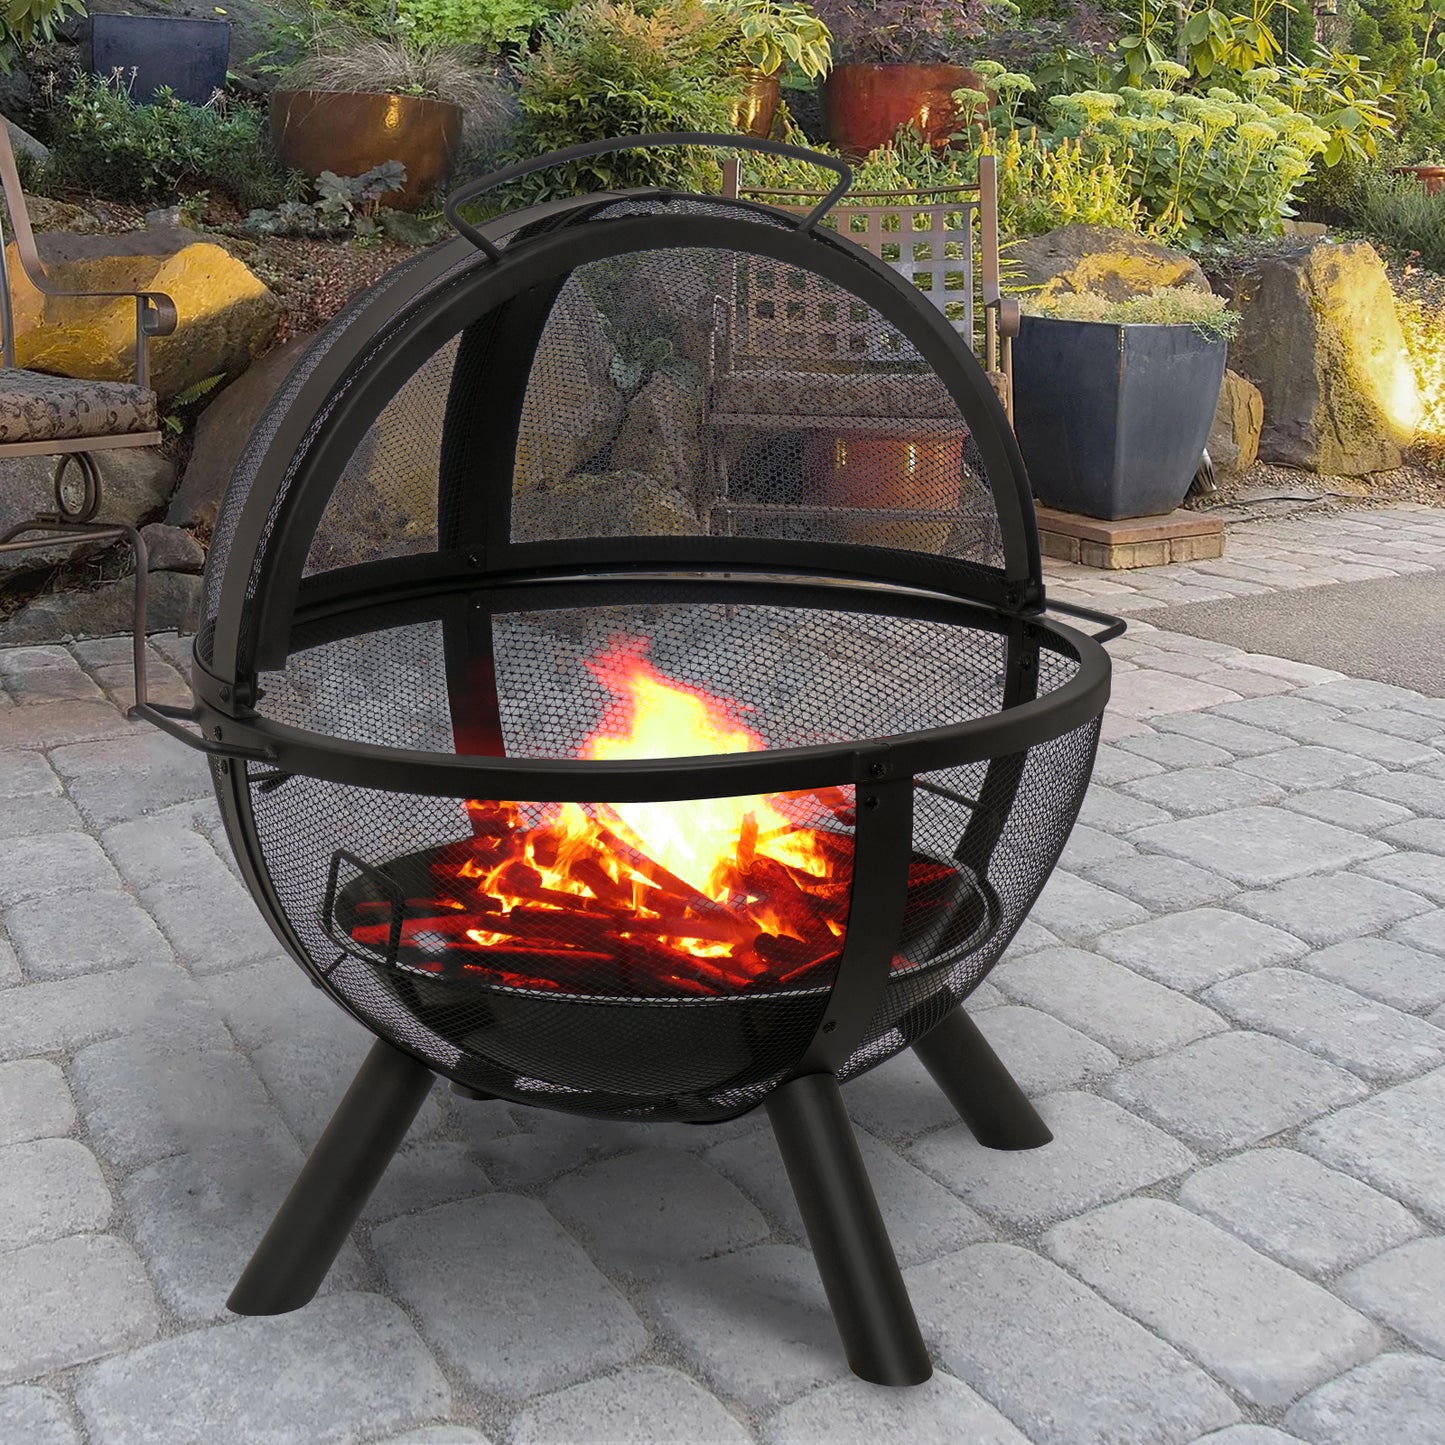 Fire pit ball with BBQ grill